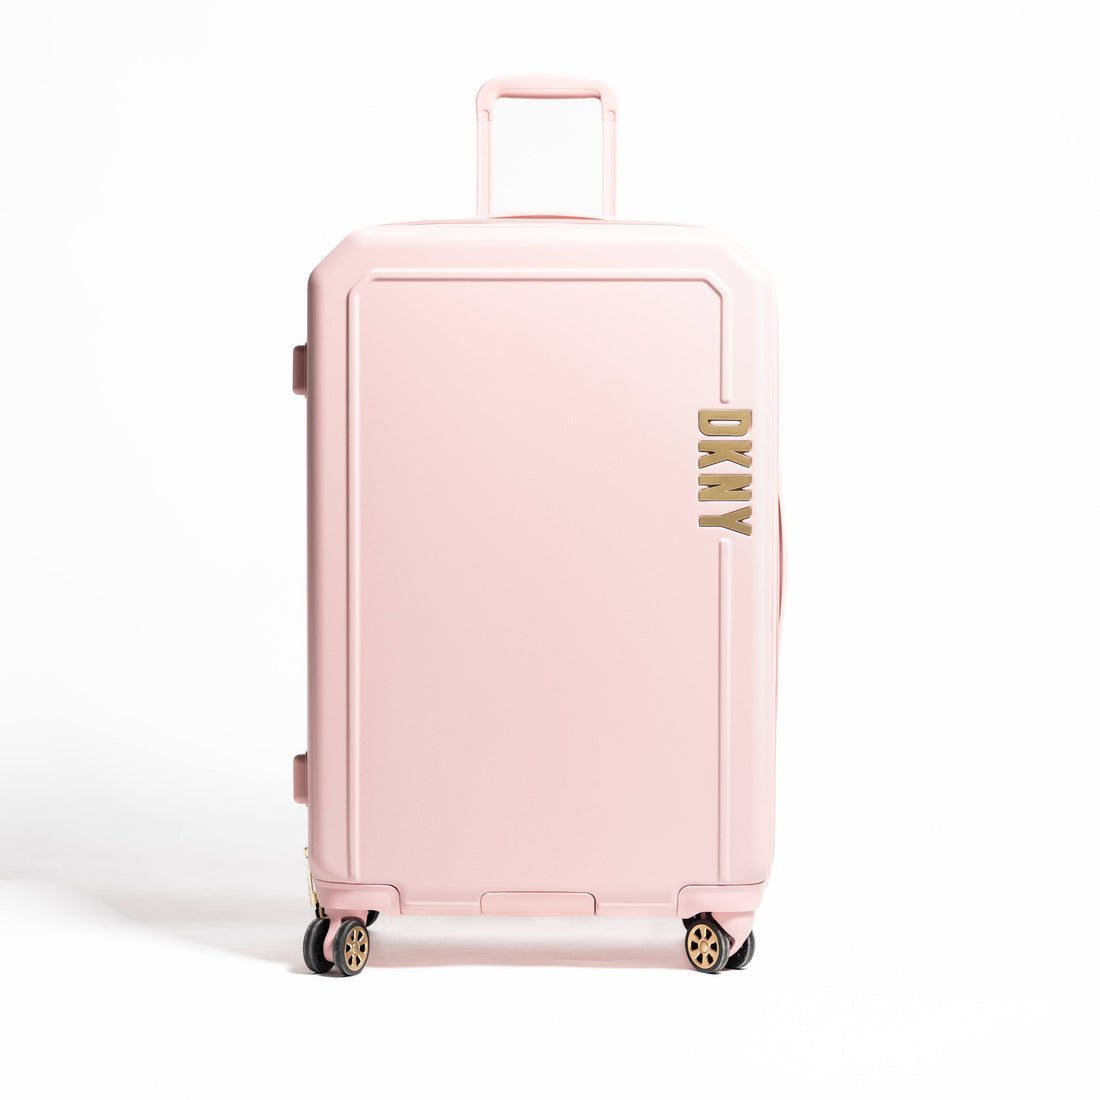 DKNY Rosey Large Luggage_DH818CC4_RO9_01